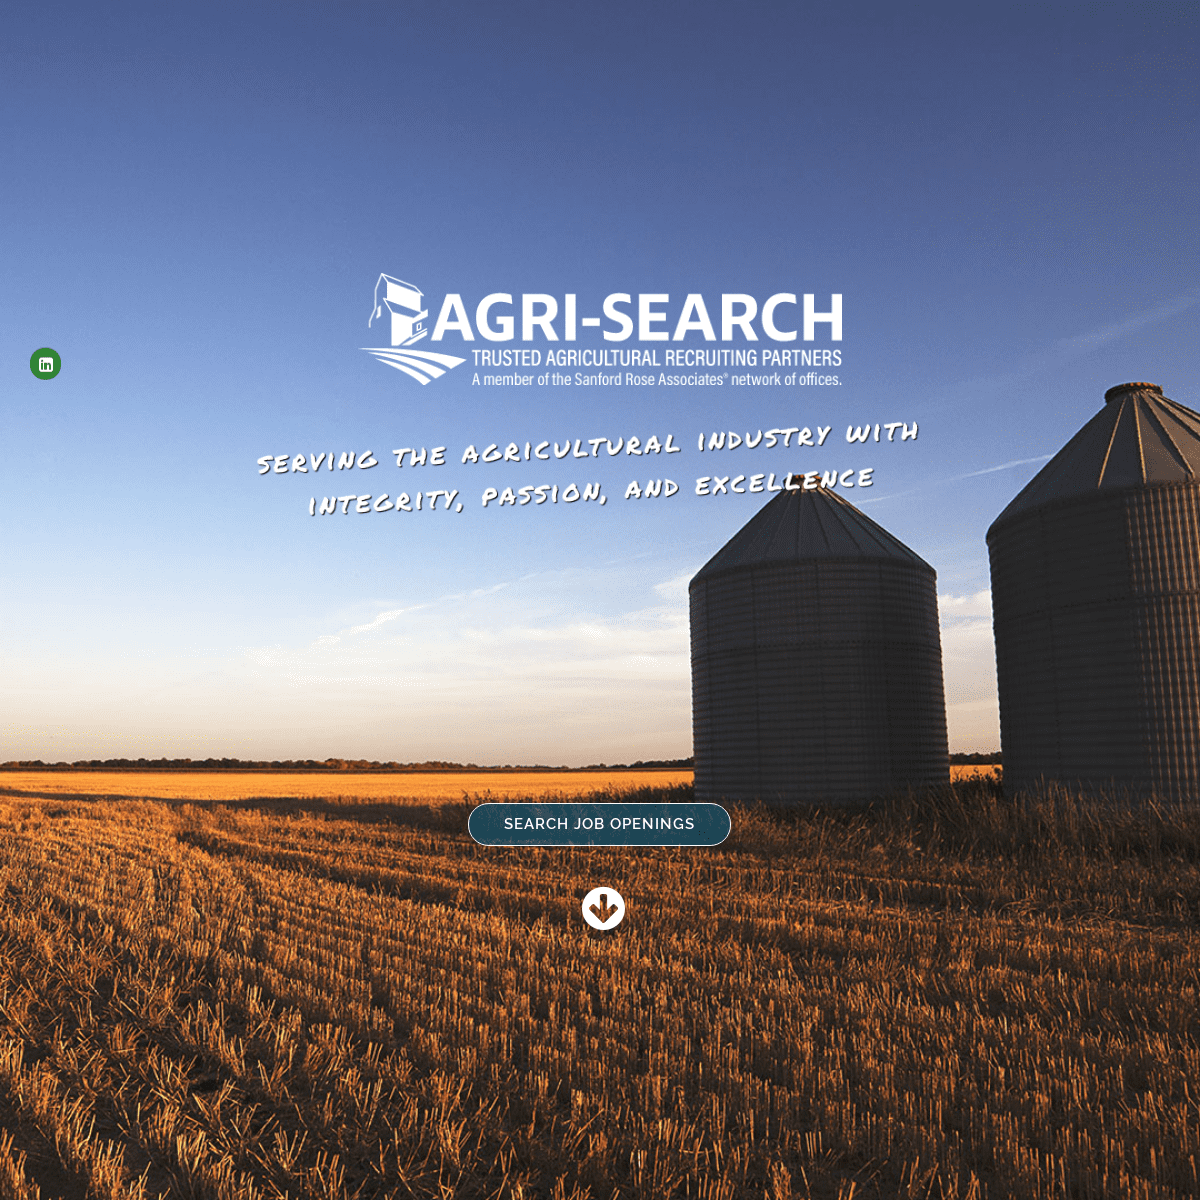 A complete backup of agri-search.com